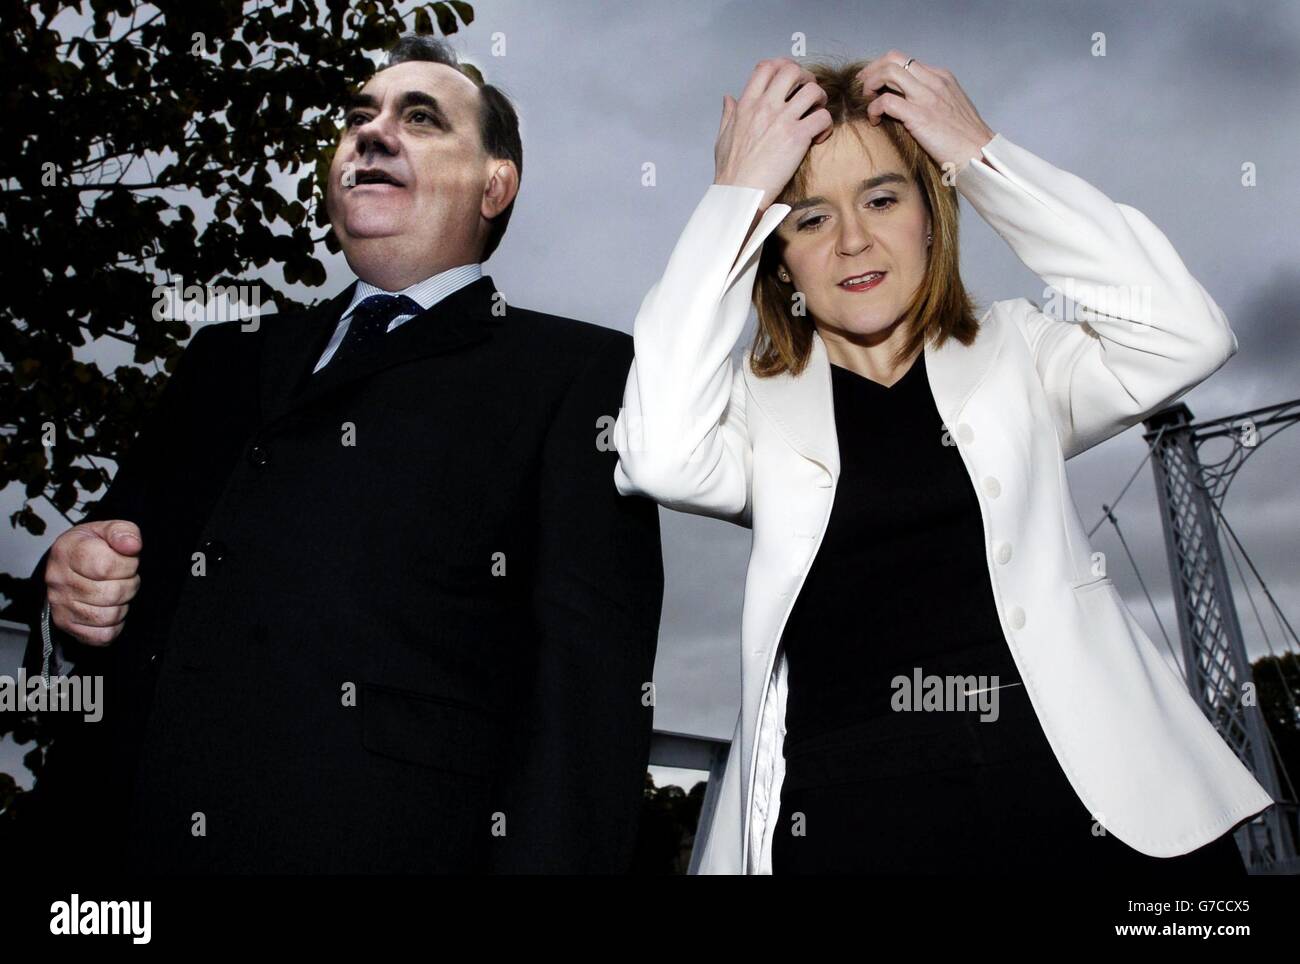 Leader Of The Scottish National Party Alex Salmond With His Deputy Stock Photo Alamy